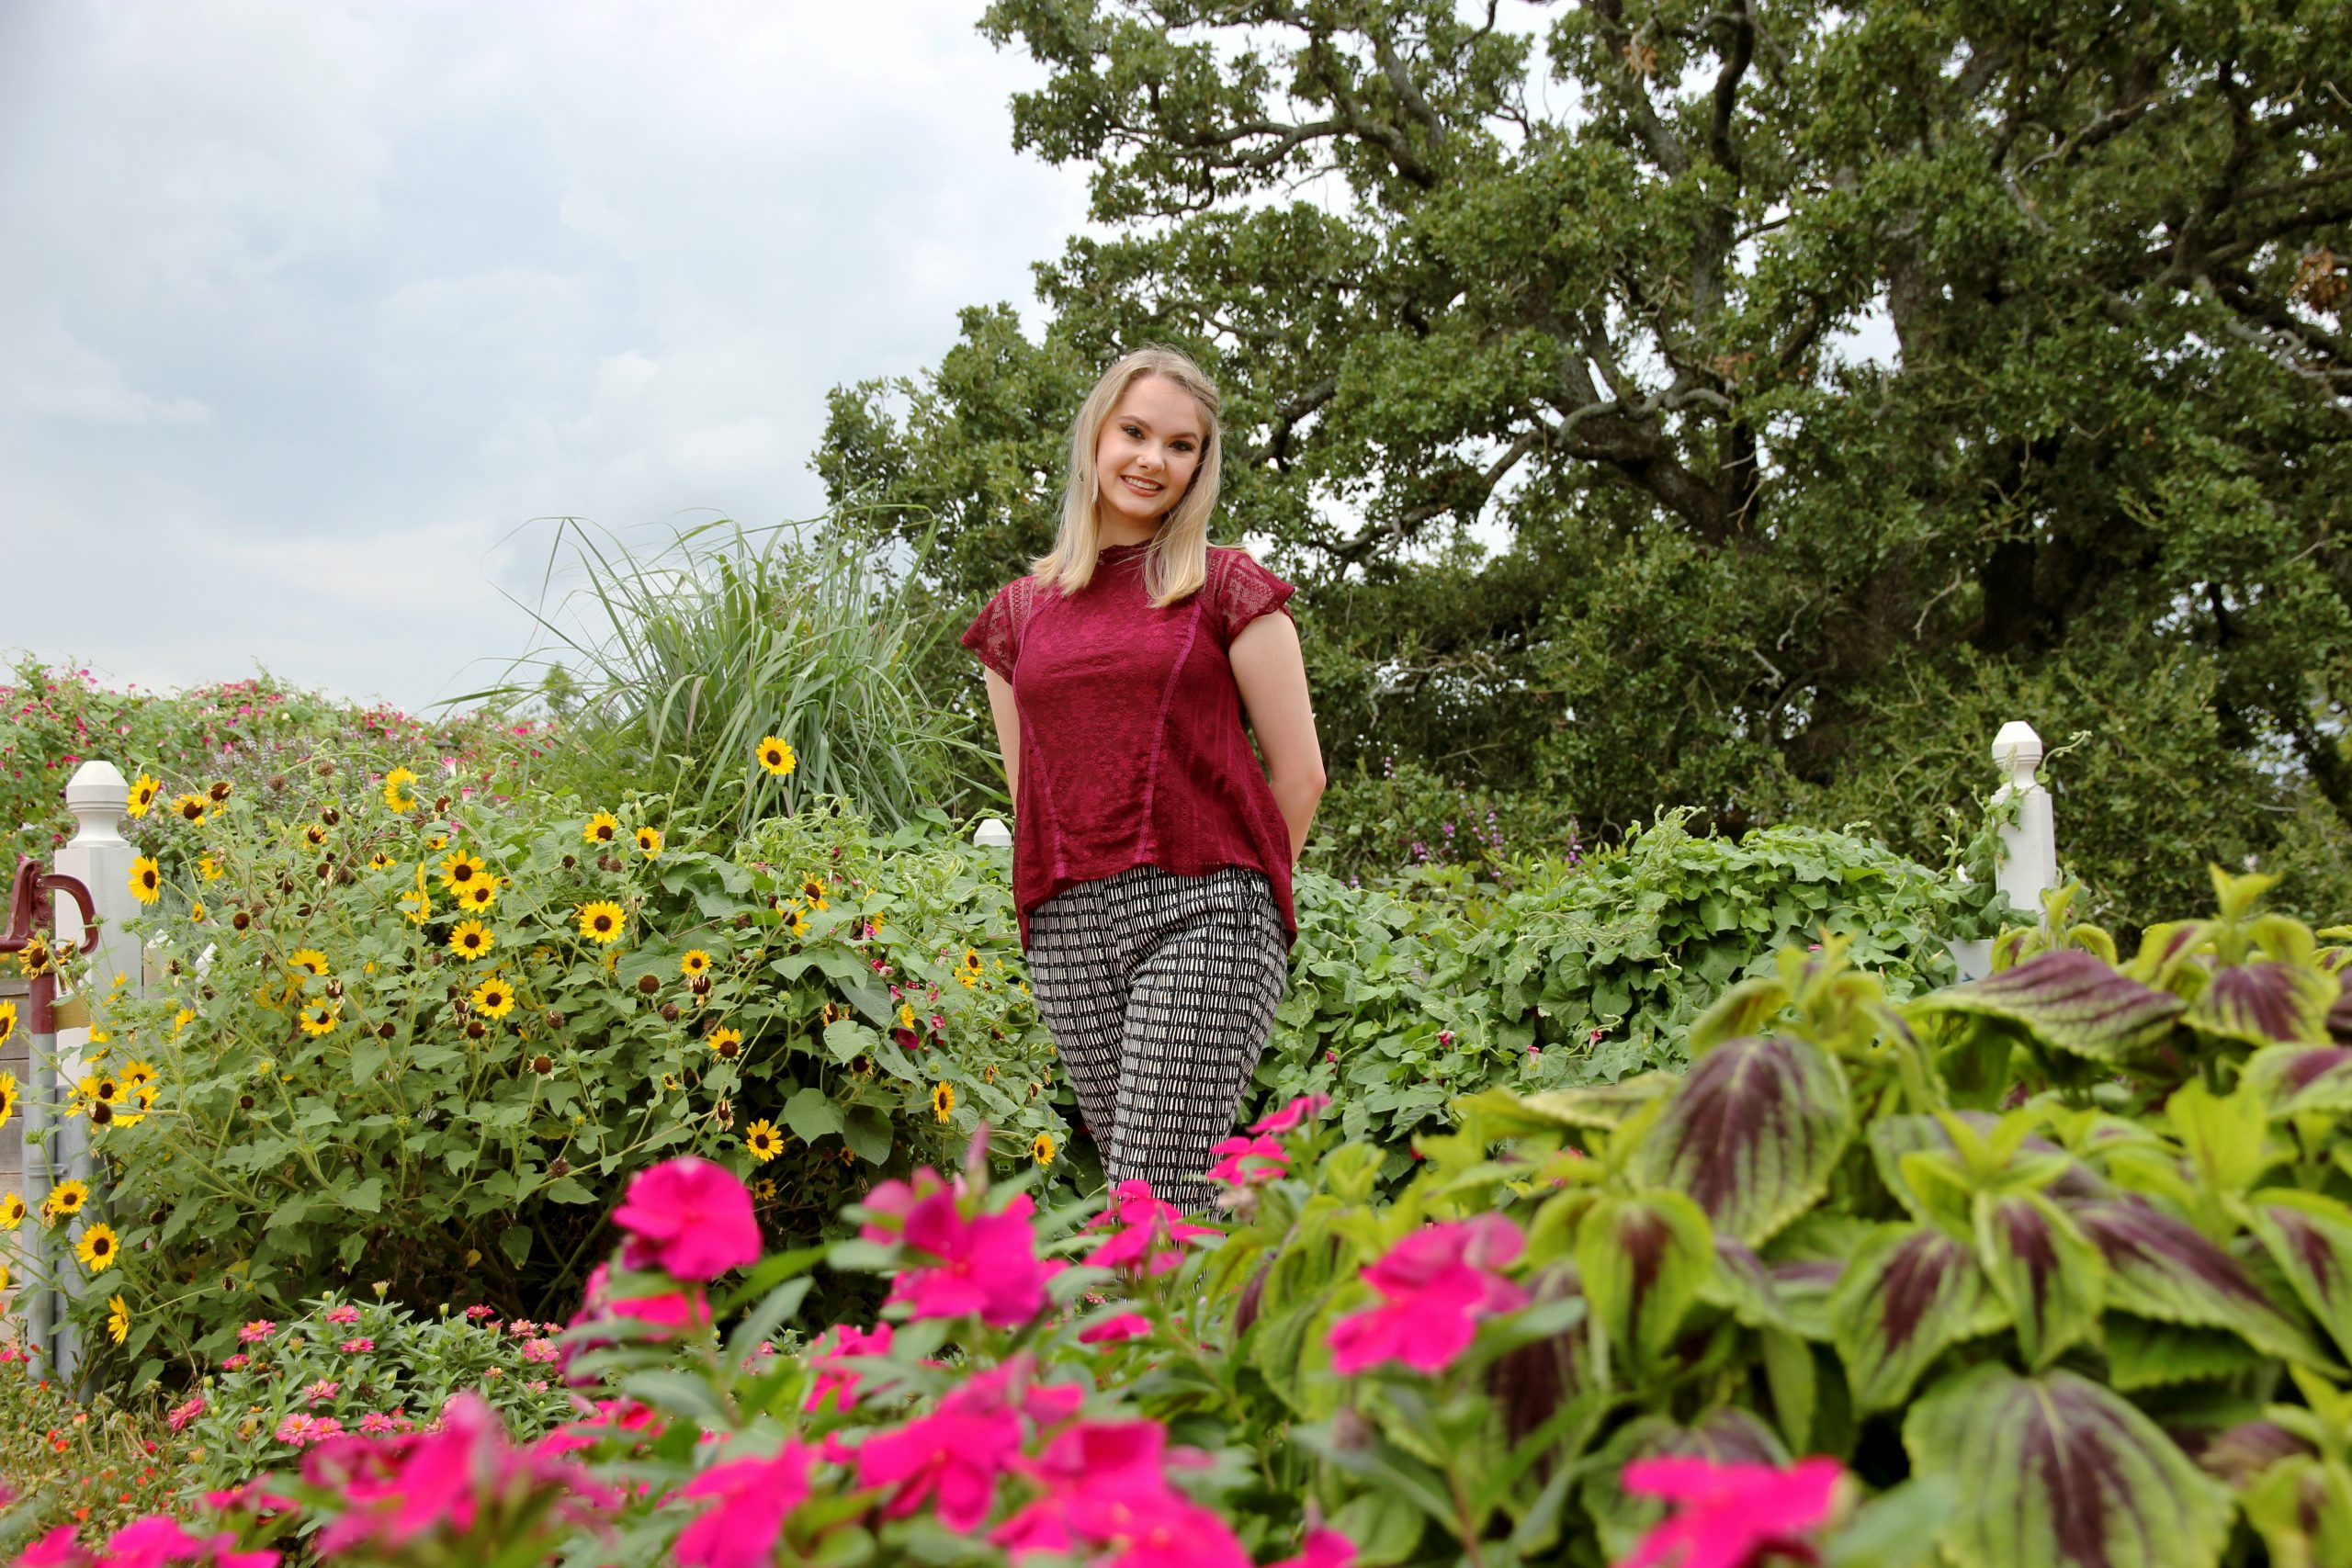 Natalie Parks in The Gardens at Texas A&M University.